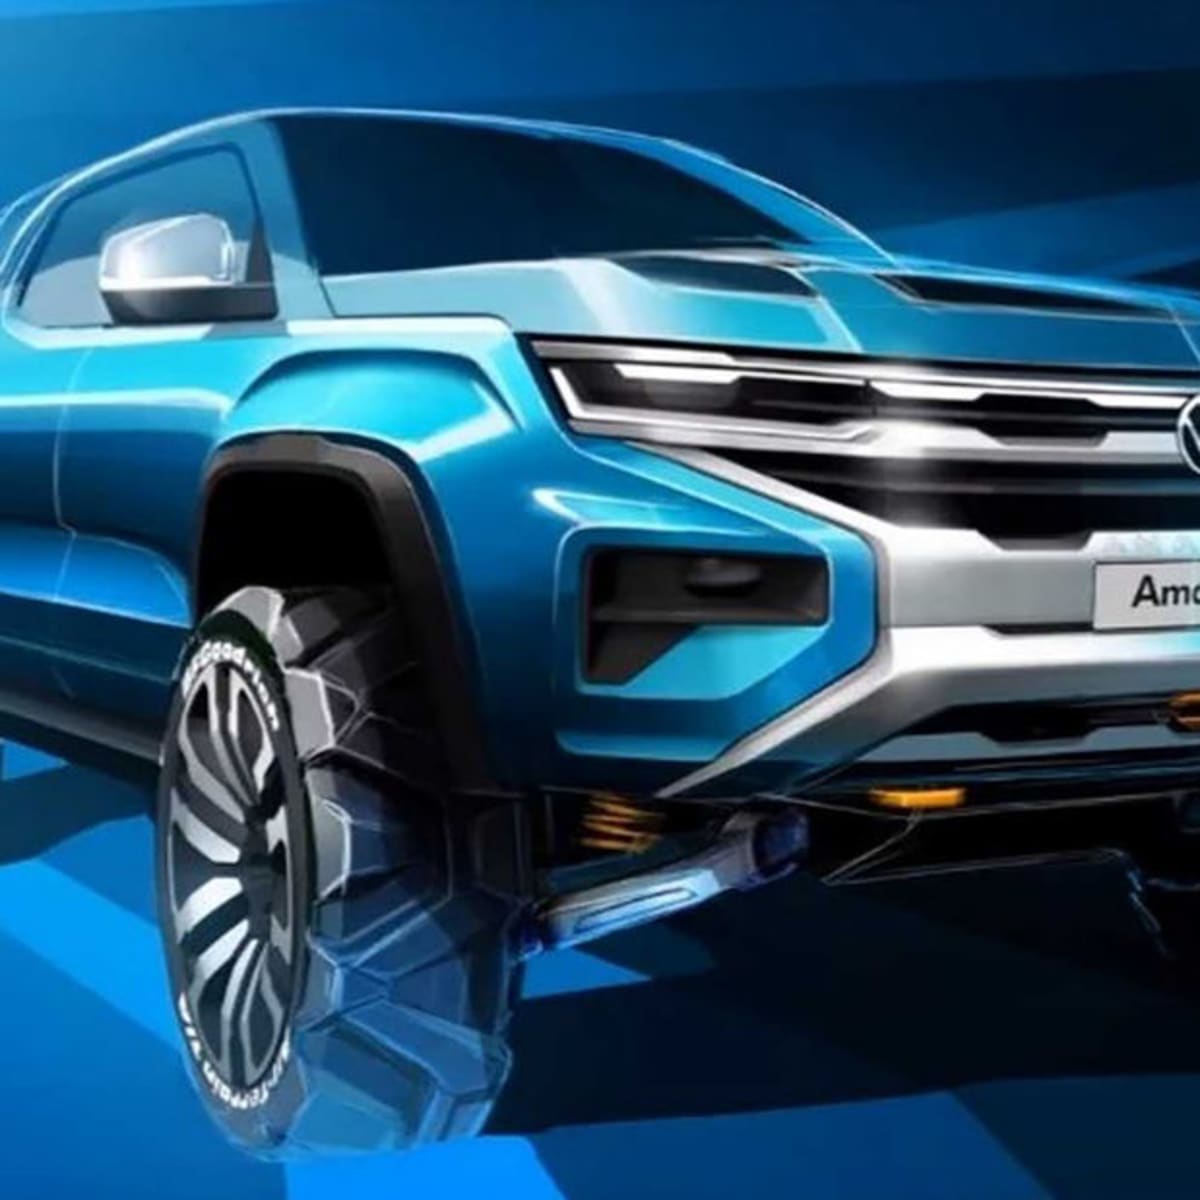 2022 Volkswagen Amarok What We Know So Far And What We Want To